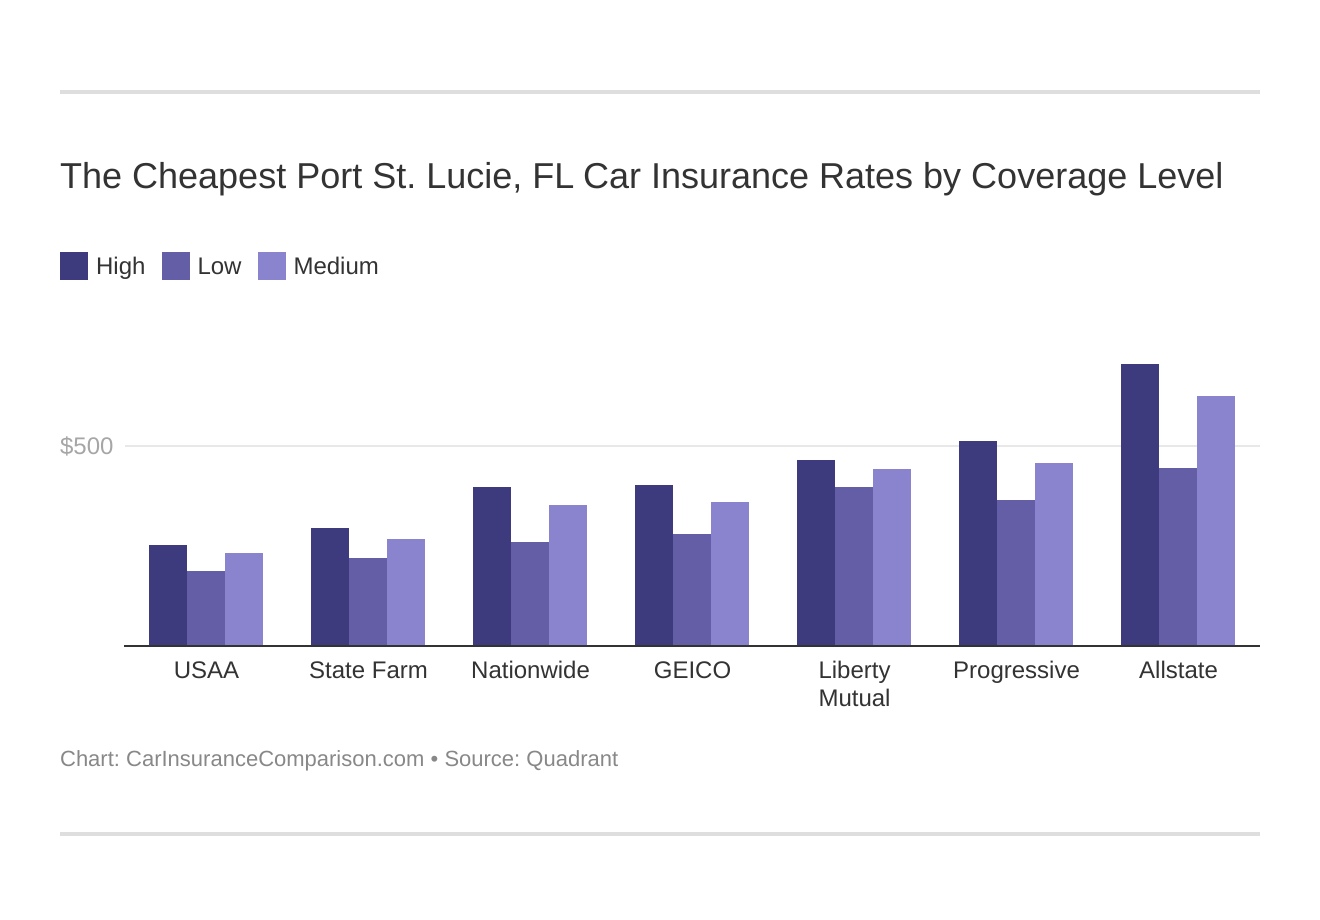 The Cheapest Port St. Lucie, FL Car Insurance Rates by Coverage Level